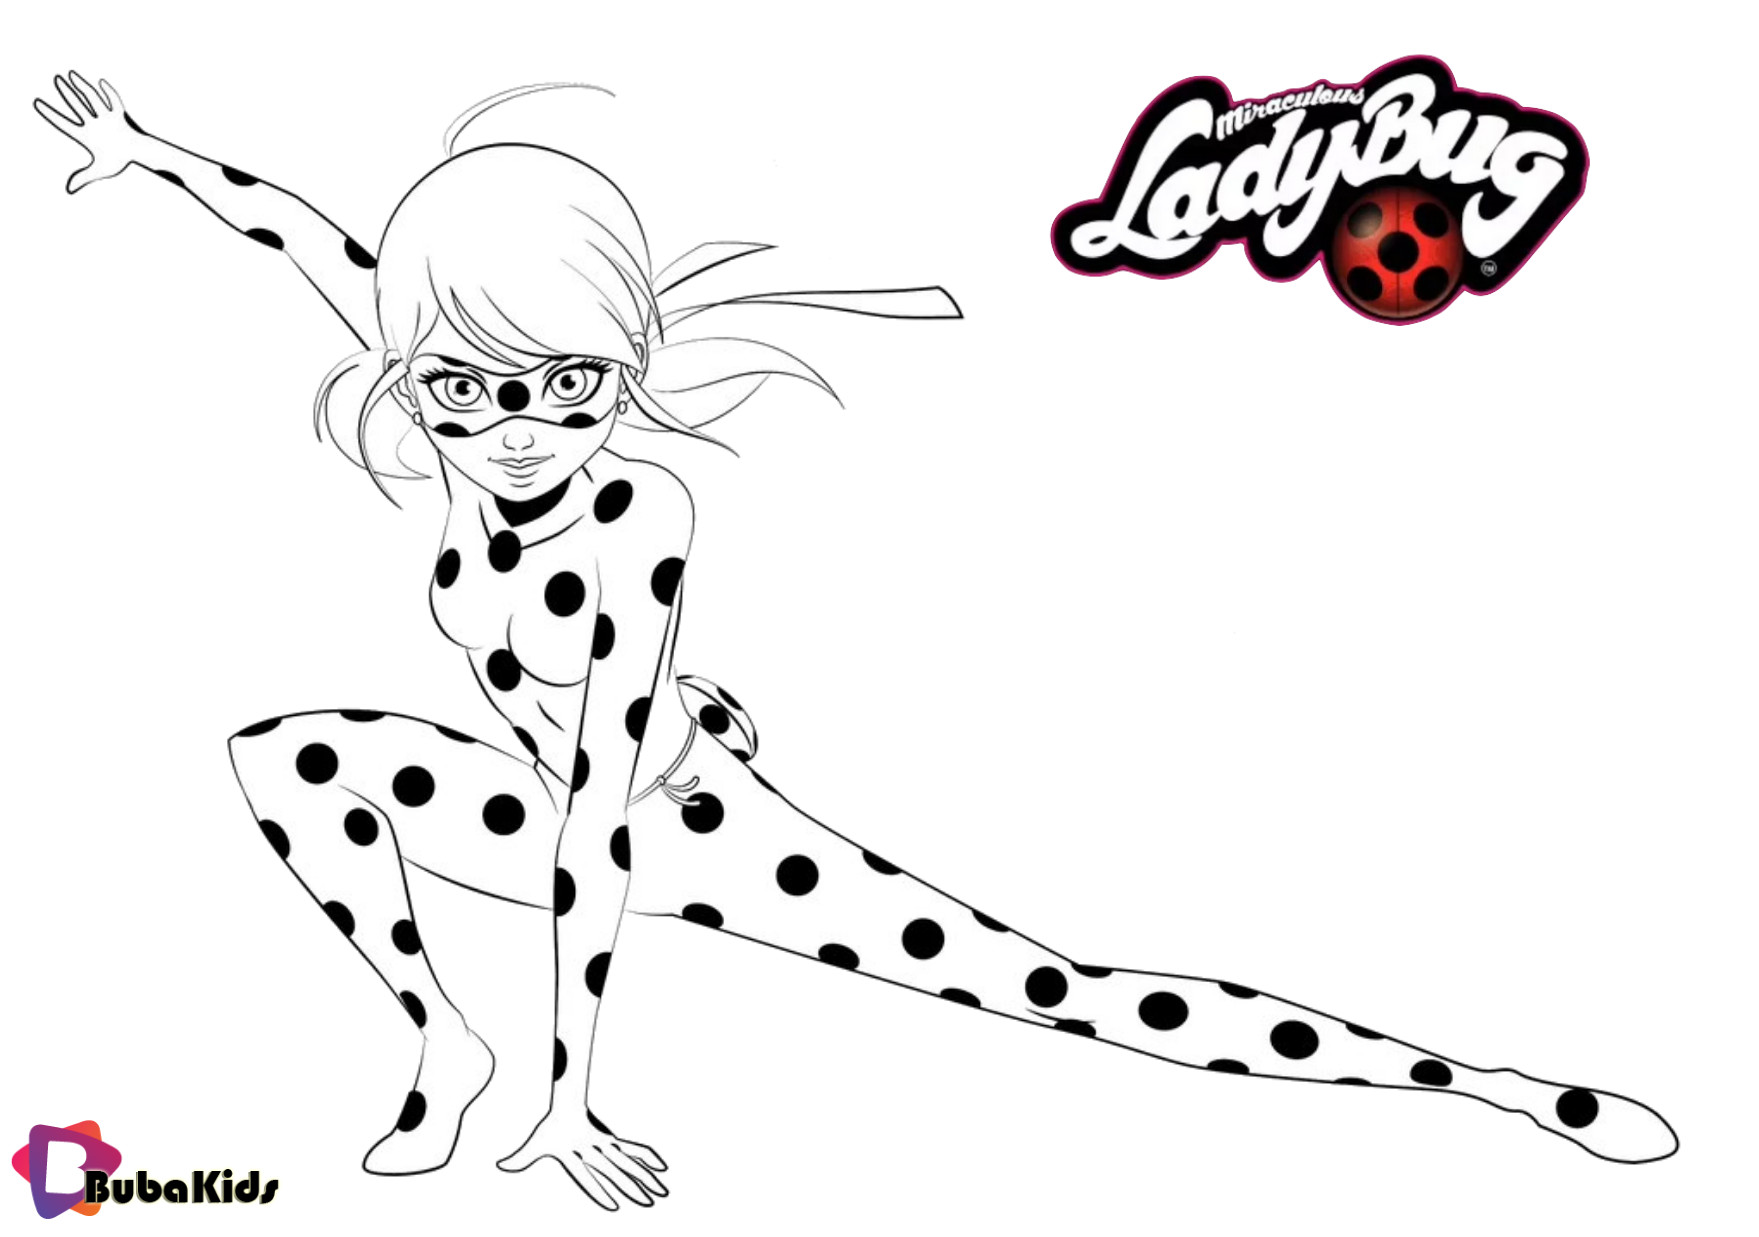 Marinette Dupain-Cheng Miraculous Tales of Ladybug and Cat Noir coloring page Wallpaper